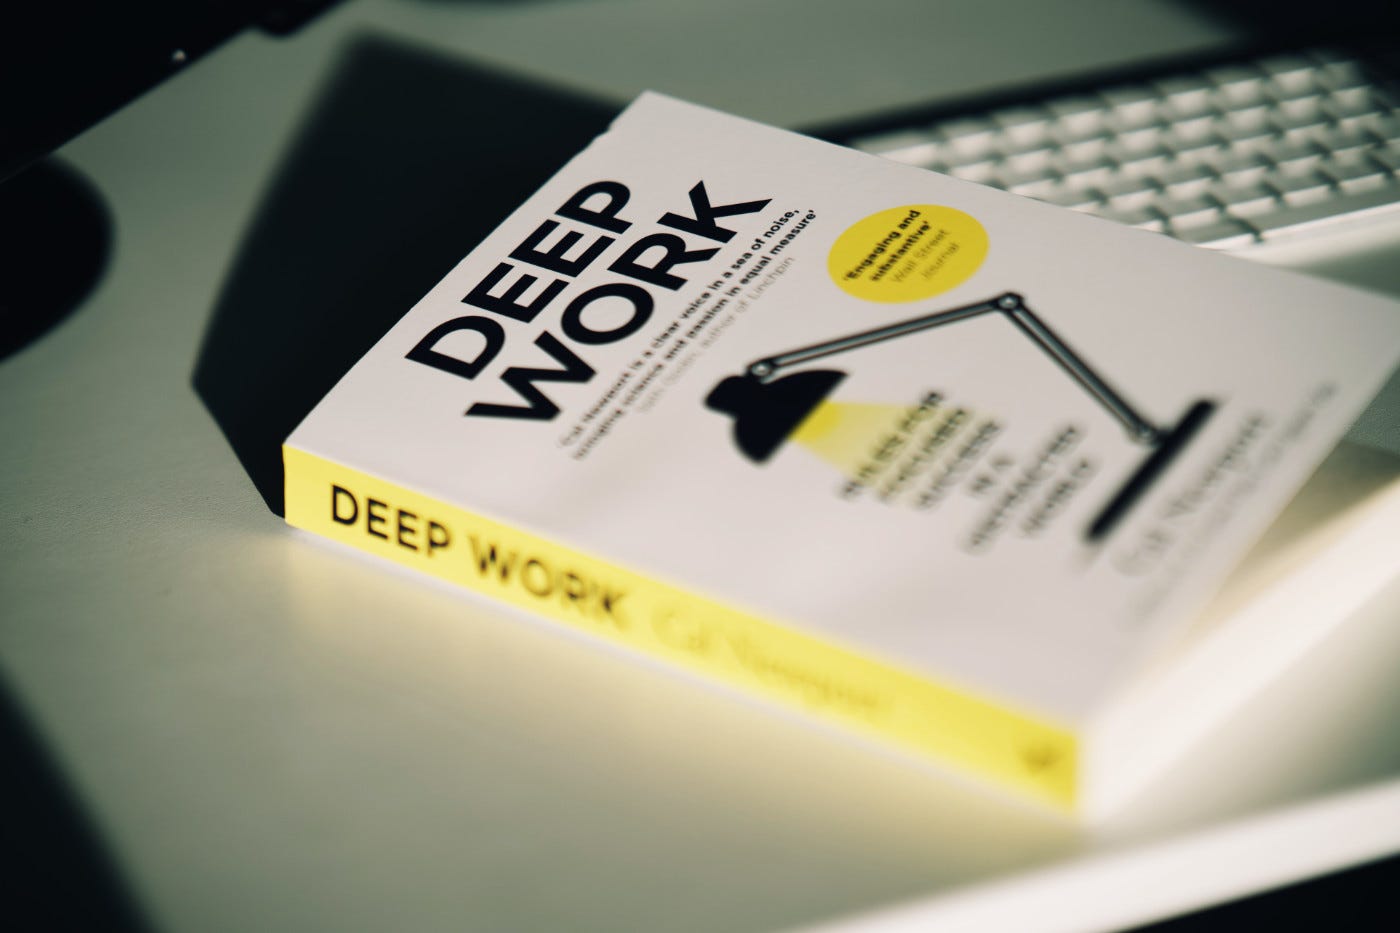 20-facts-about-deep-work